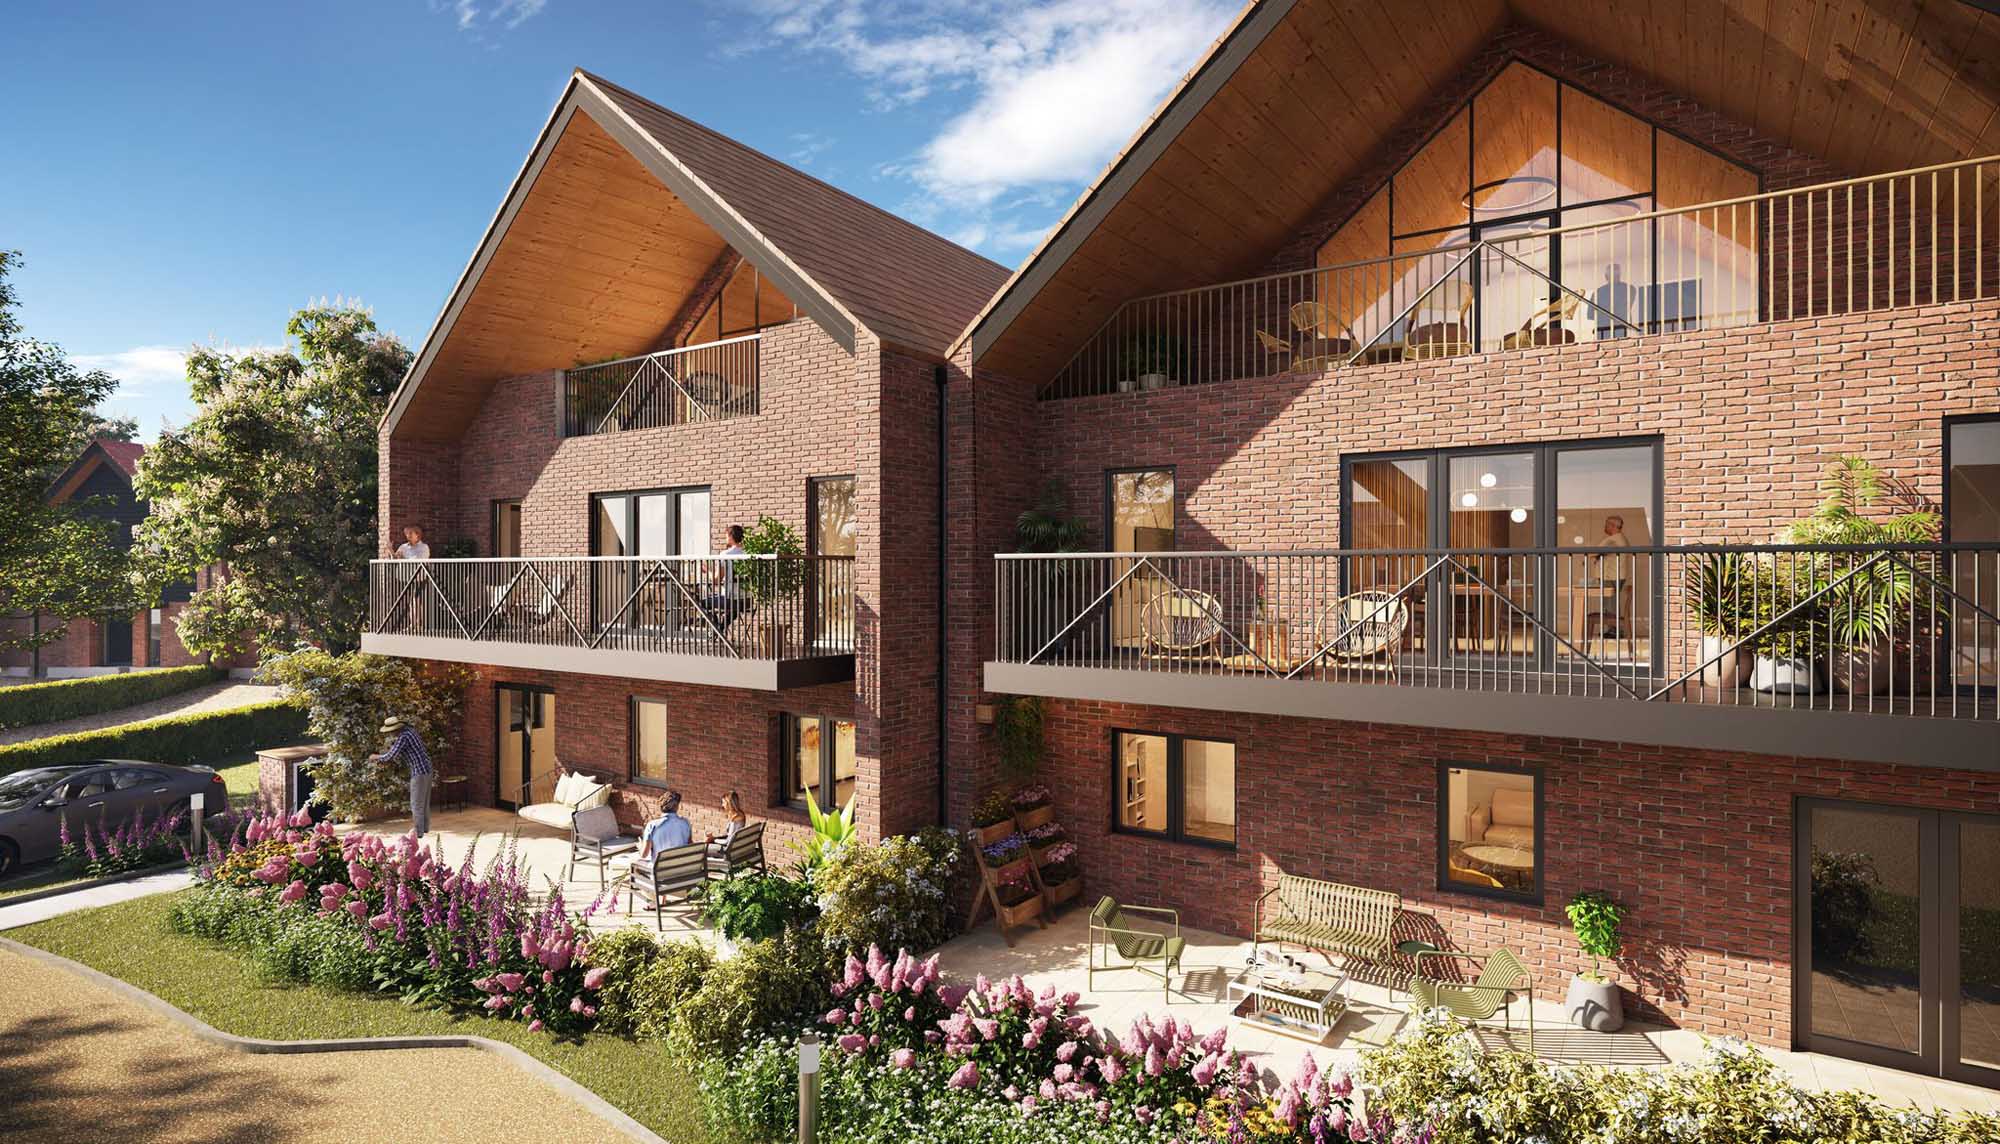 Shiplake Meadows - the £50m integrated retirement community launches in South Oxfordshire